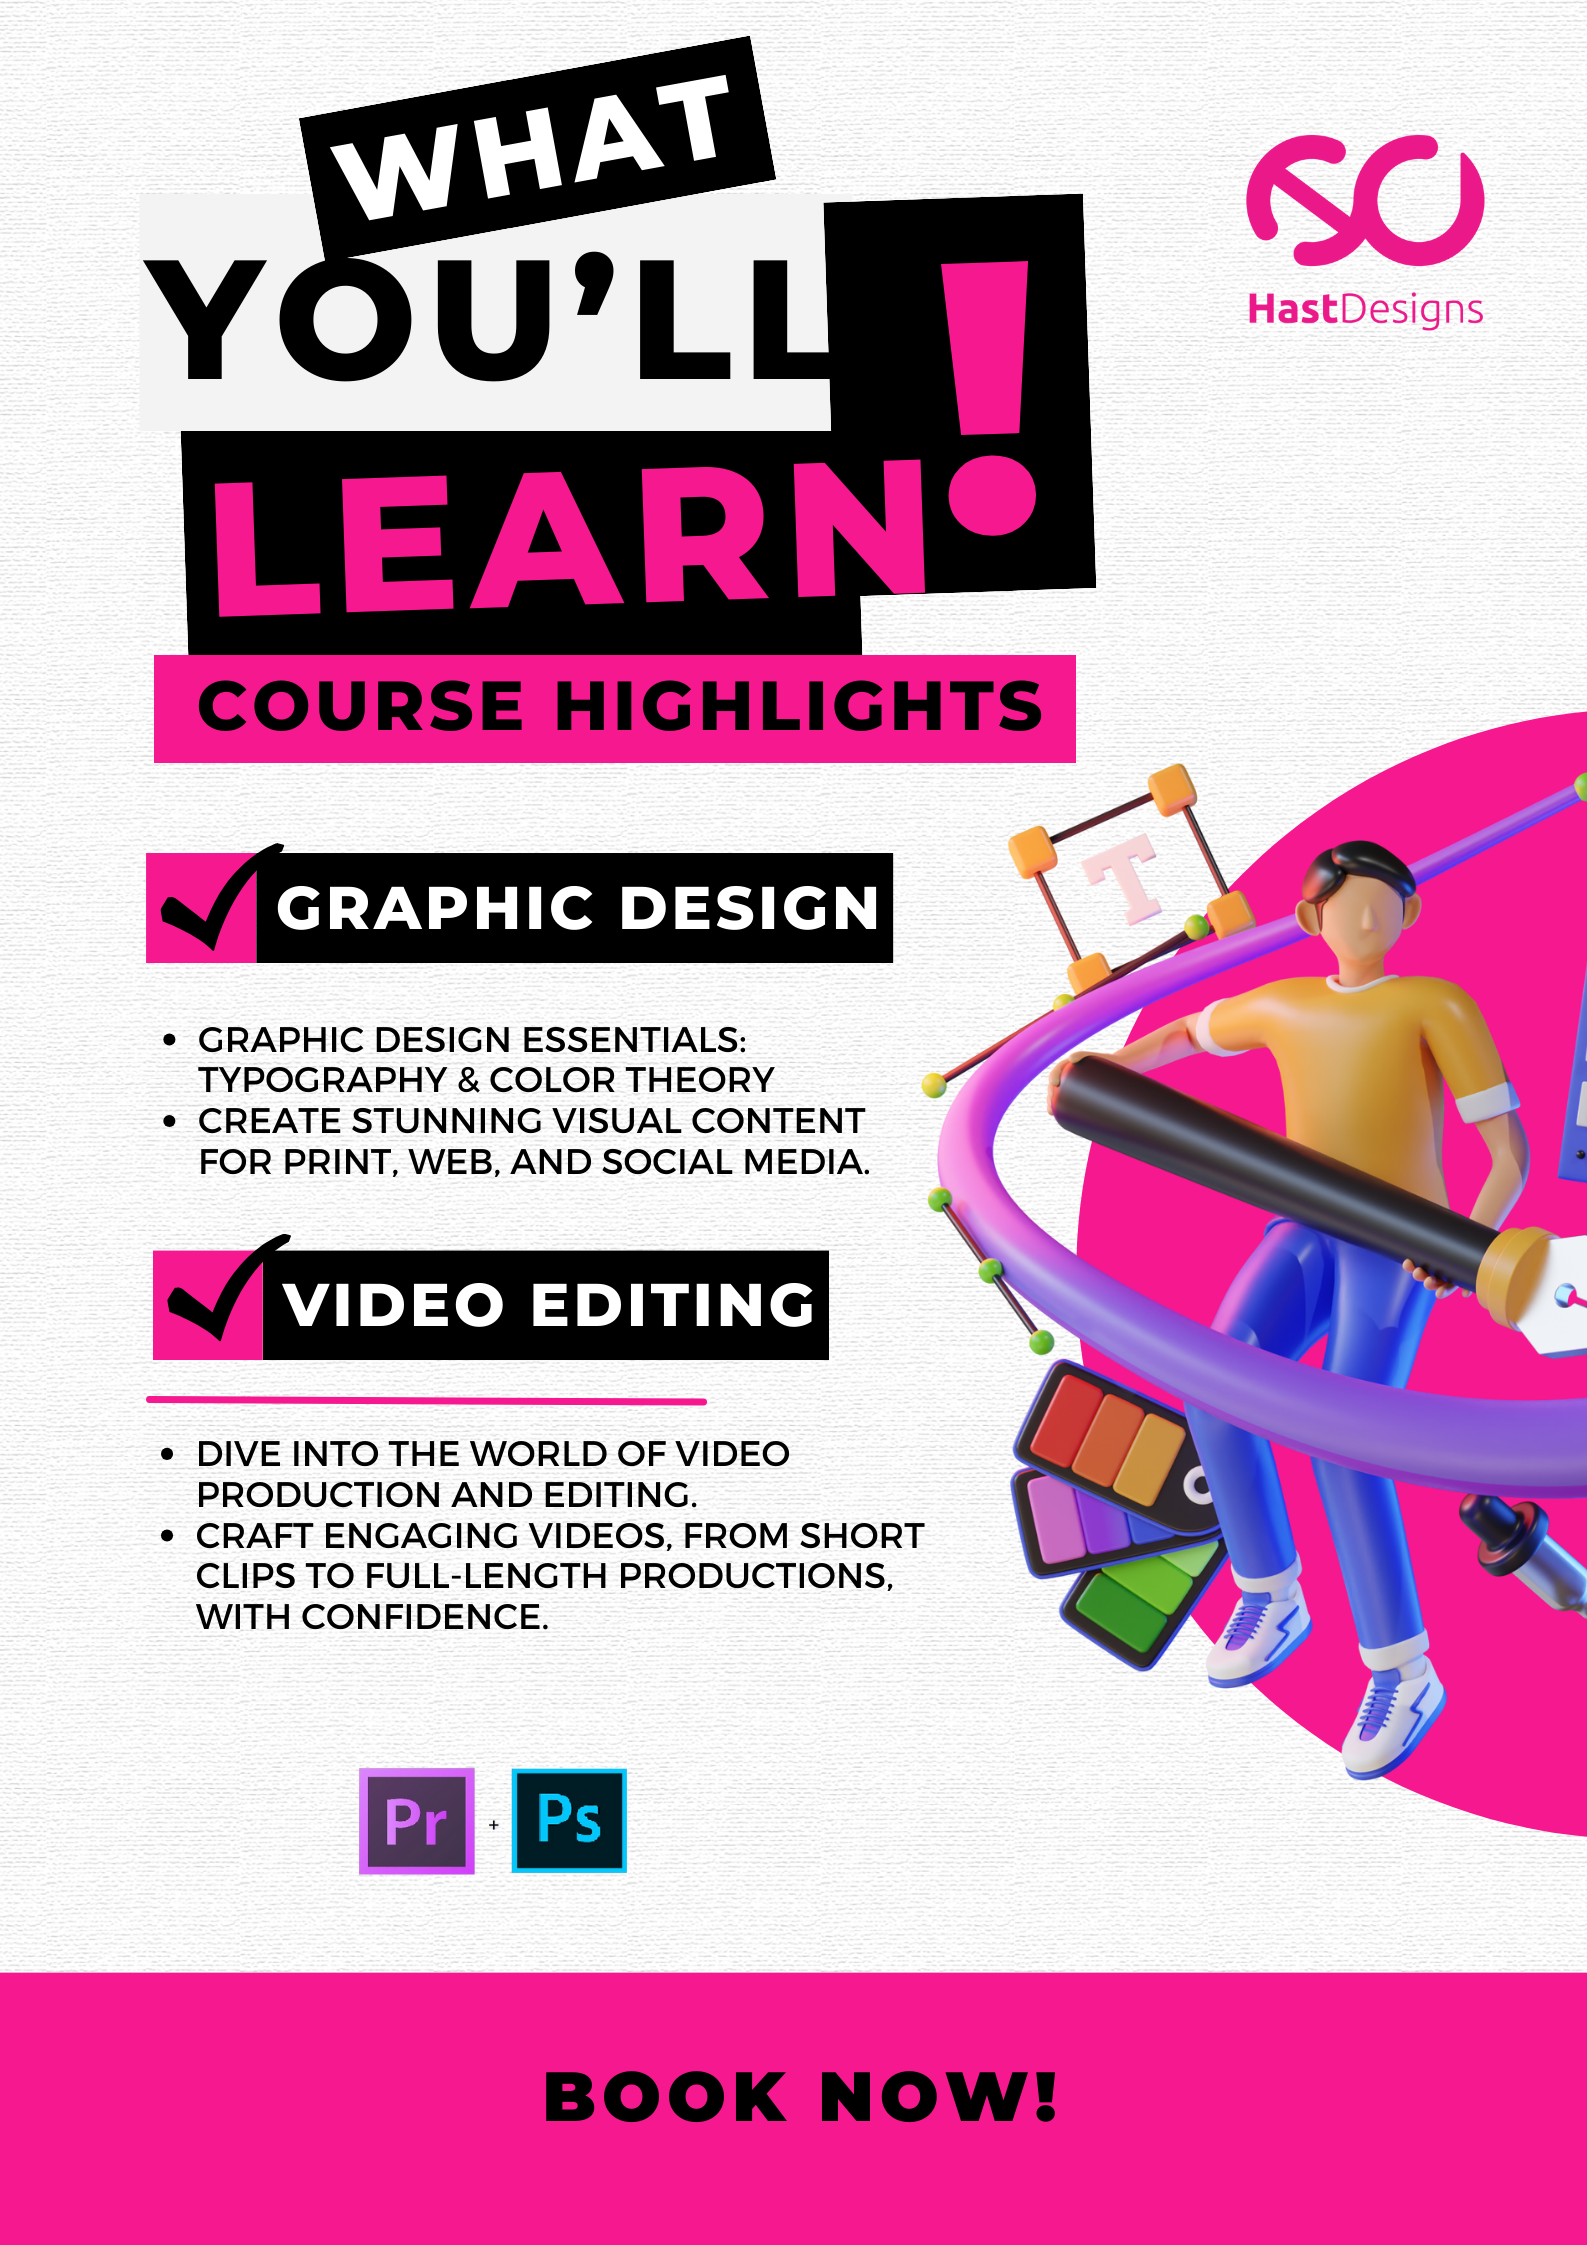 Graphic design Training course with Hast Designs